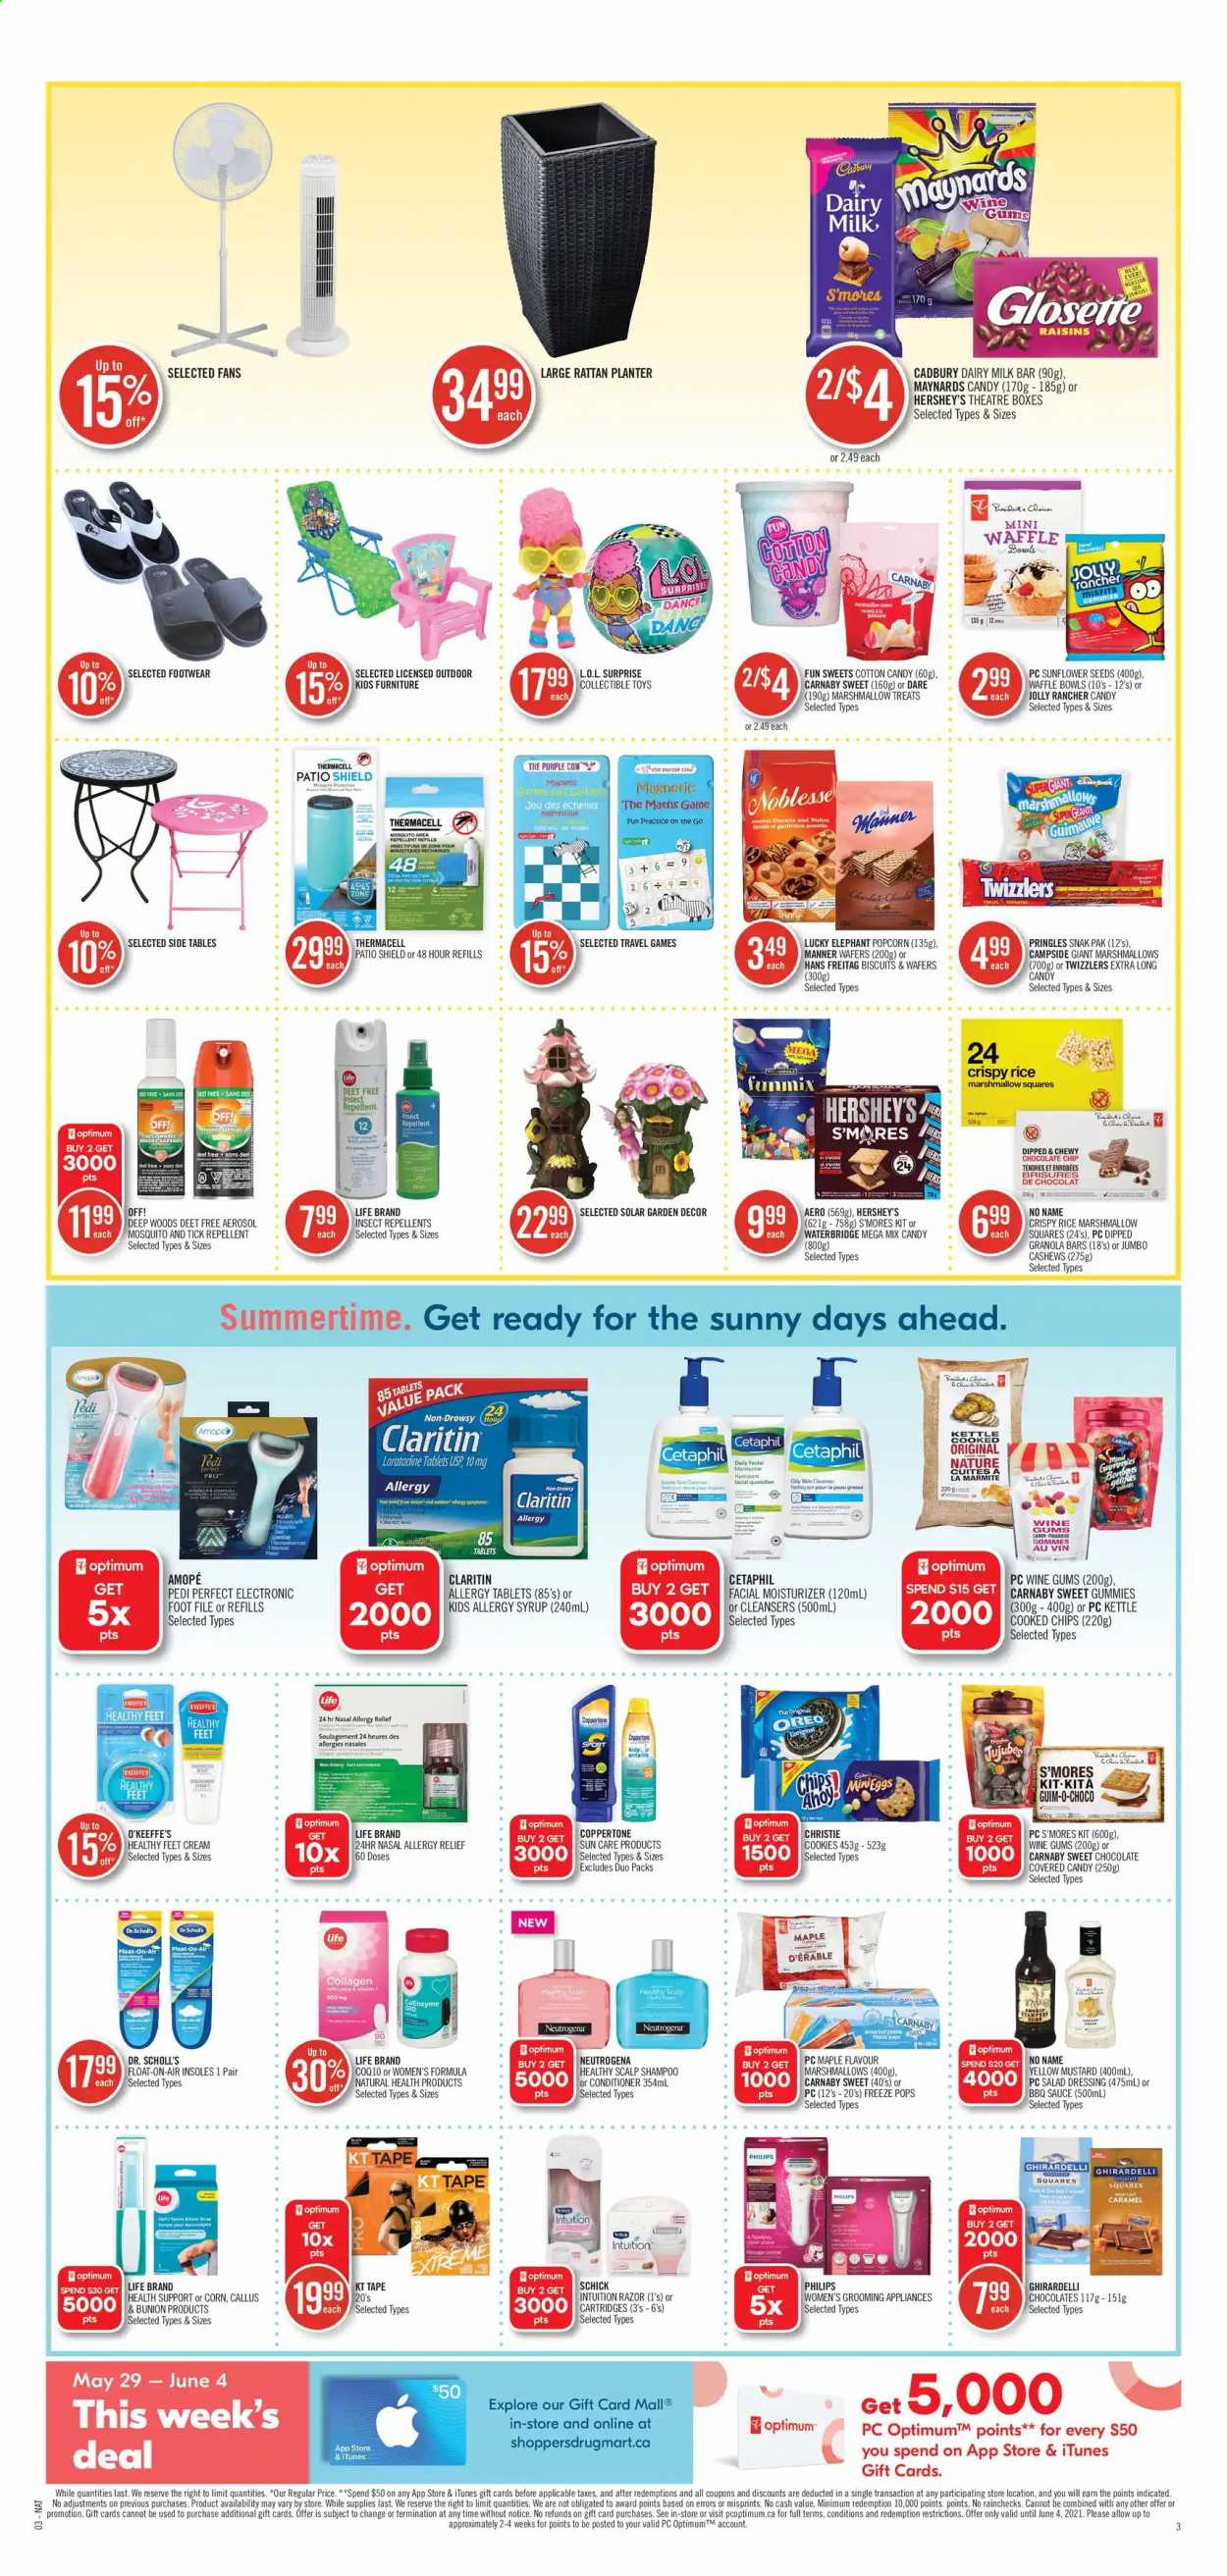 thumbnail - Circulaire Shoppers Drug Mart - 29 Mai 2021 - 04 Juin 2021 - Produits soldés - biscuits, granola, cookies, Oreo, chips, Pringles, shampooing, Scholl, Neutrogena, Philips. Page 7.